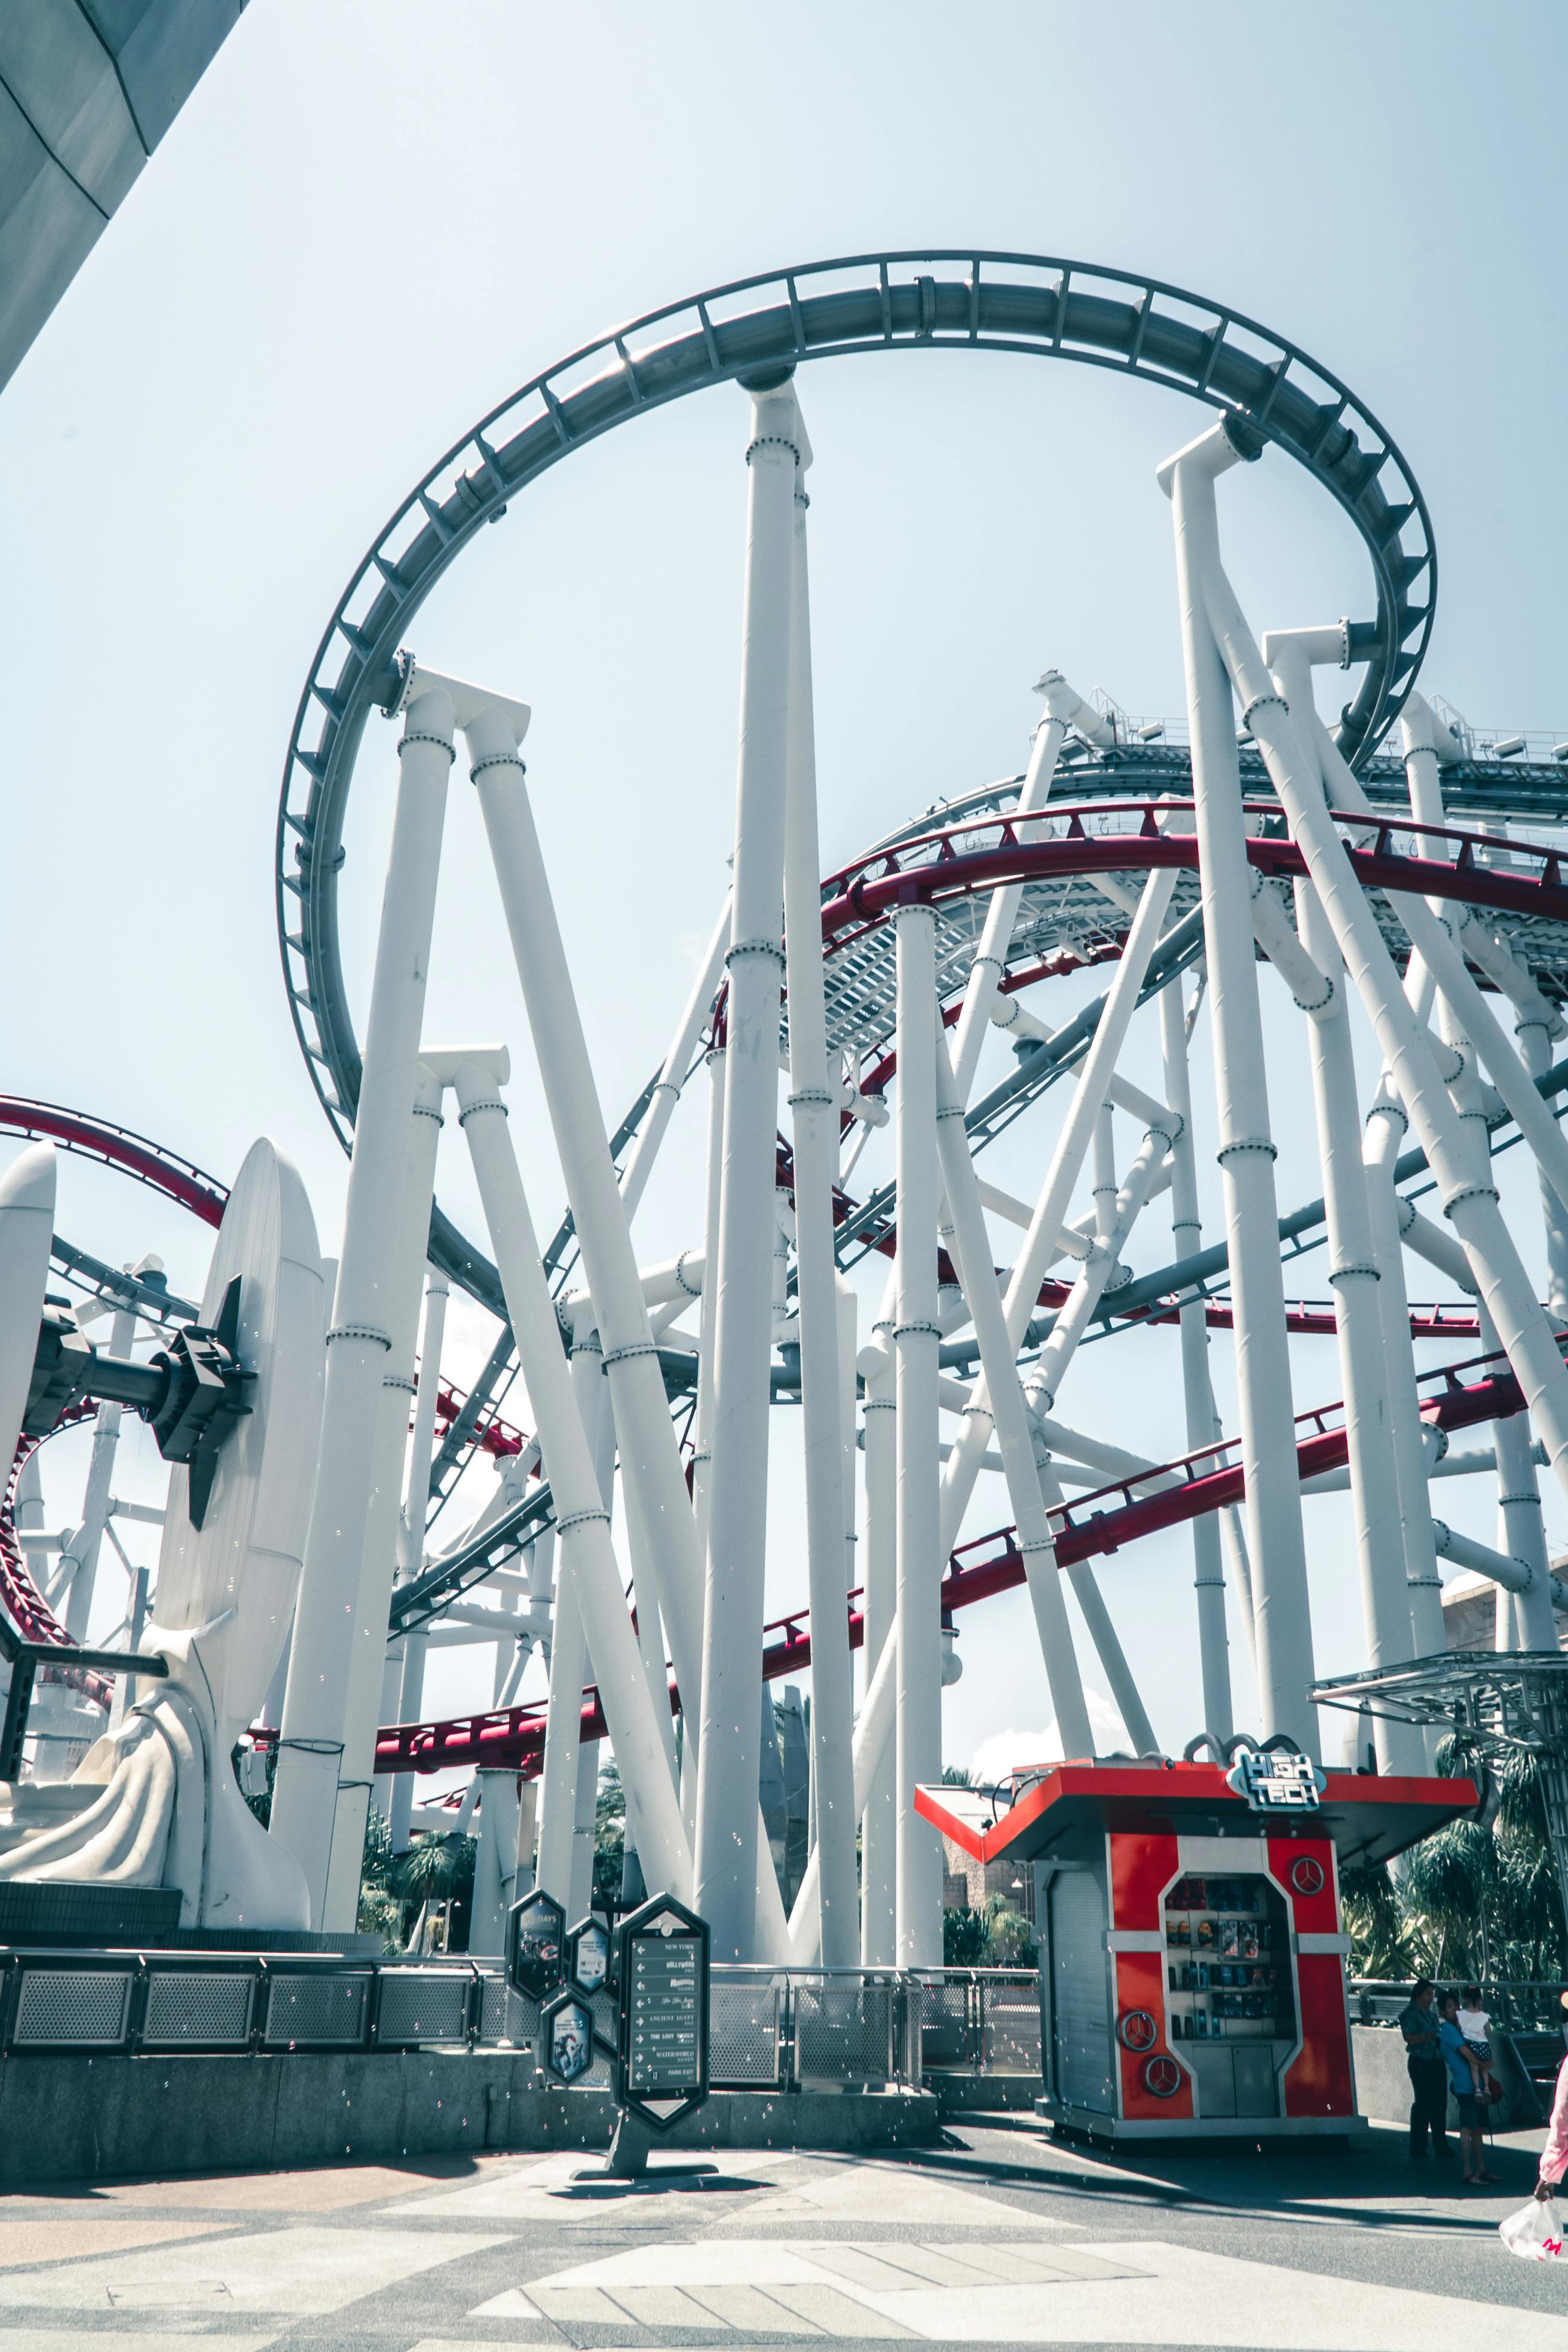 Photo of a Roller Coaster in Universal Studios at Singapore · Free Stock  Photo